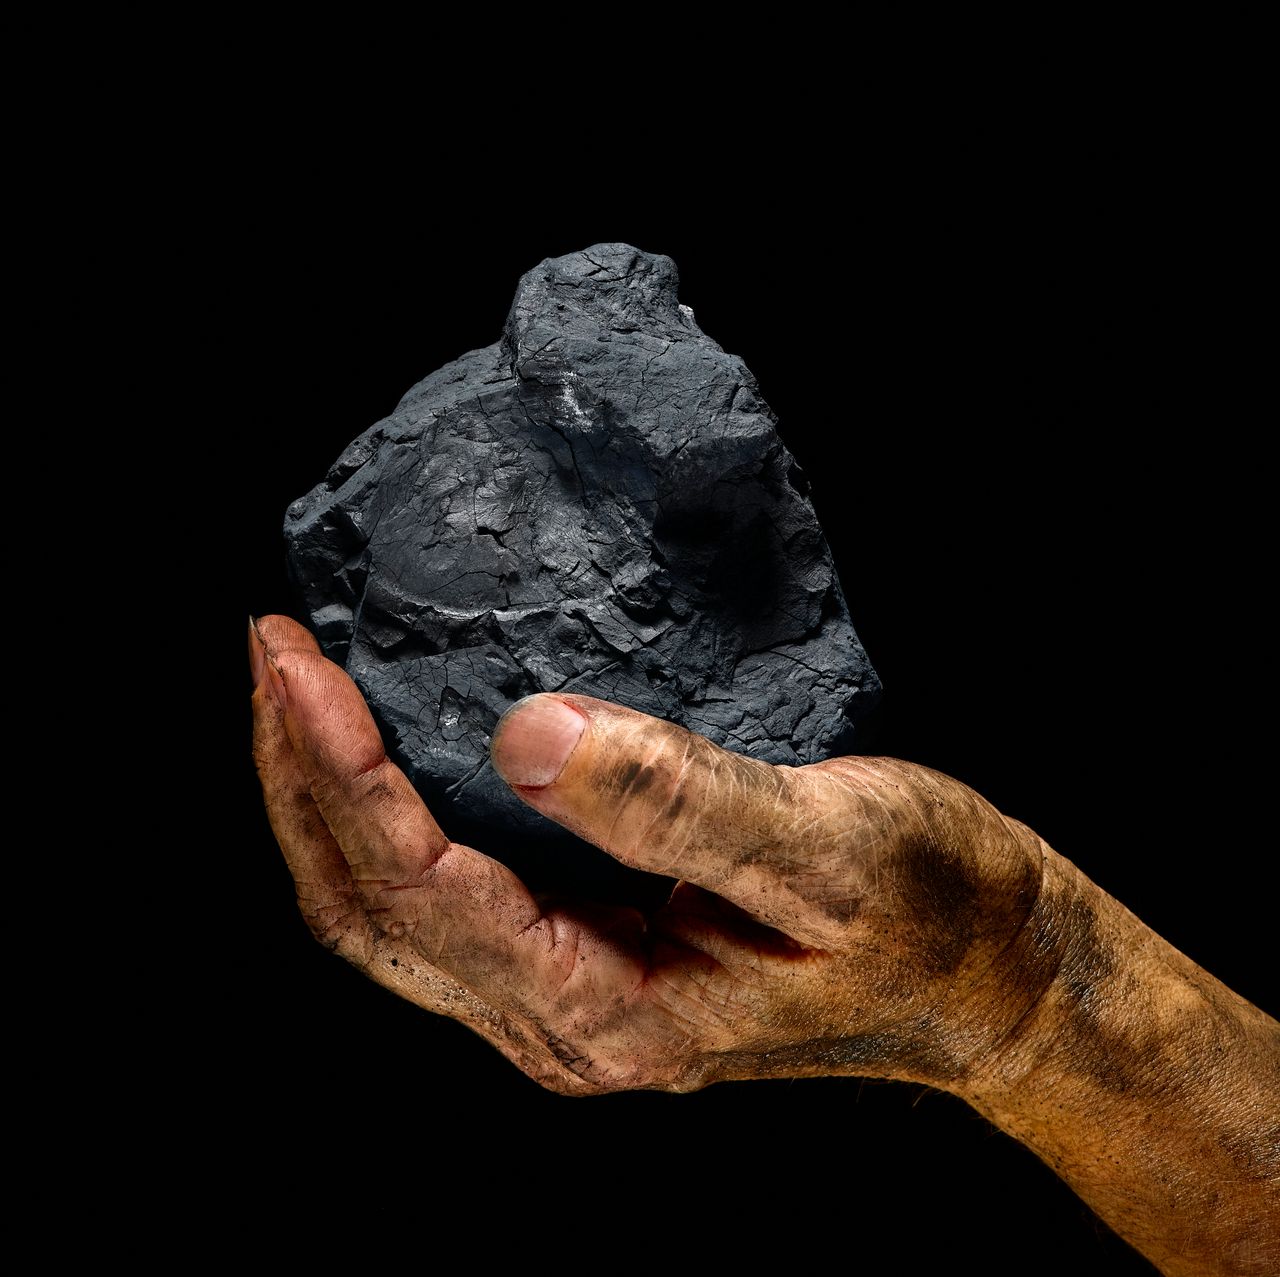 Coal has powered industrial revolutions, but at an enormous cost for climate change and human health.